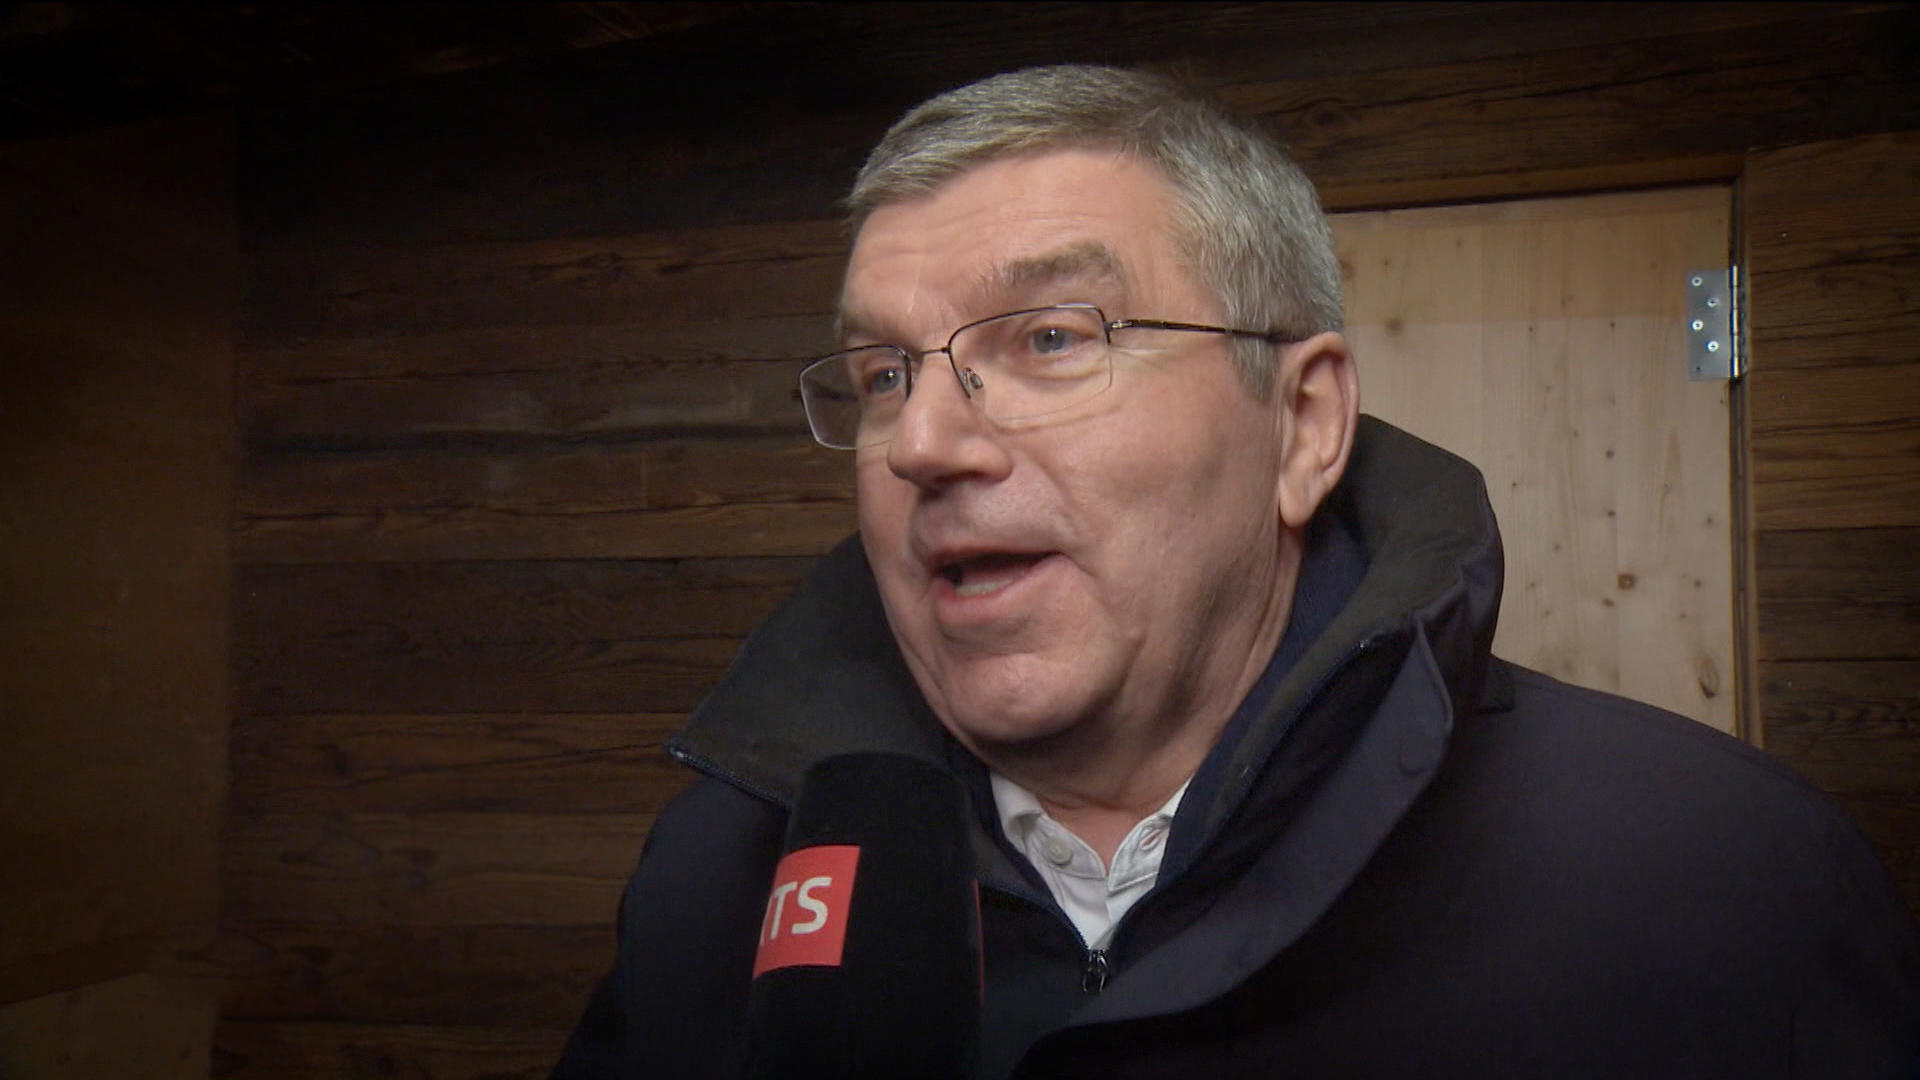 Thomas Bach President of the International Olympic Committee